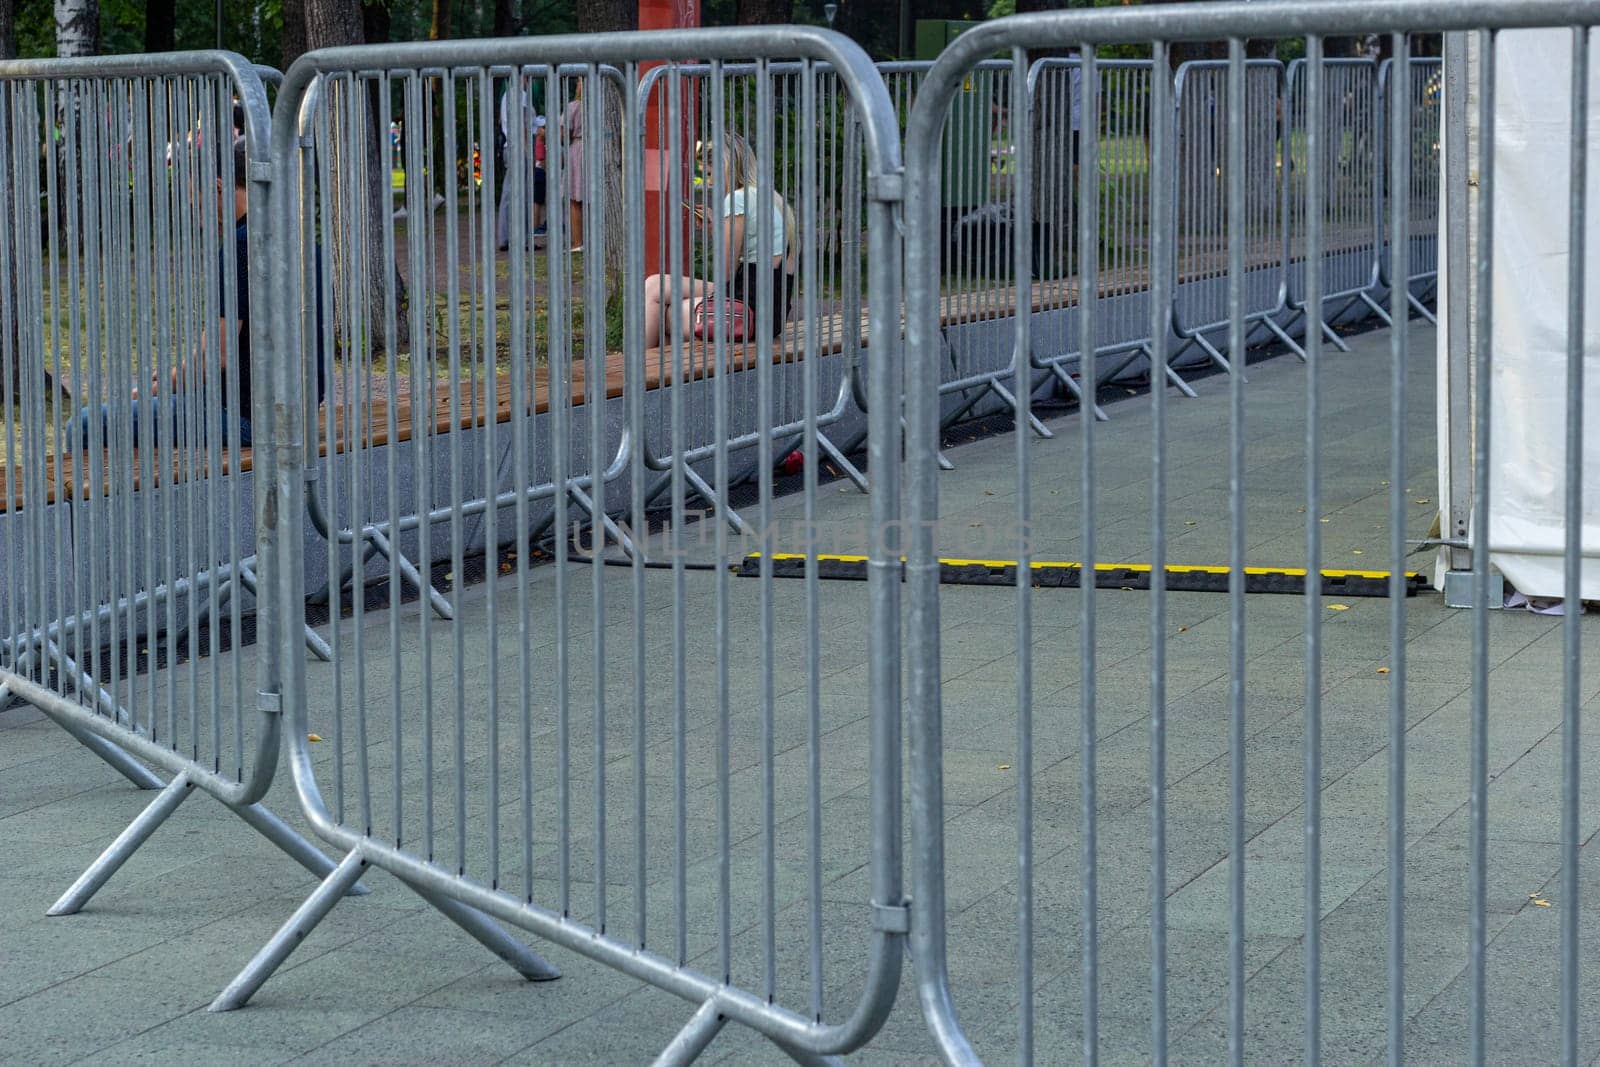 Metal fences at mass events protect people. Prohibition of passage.